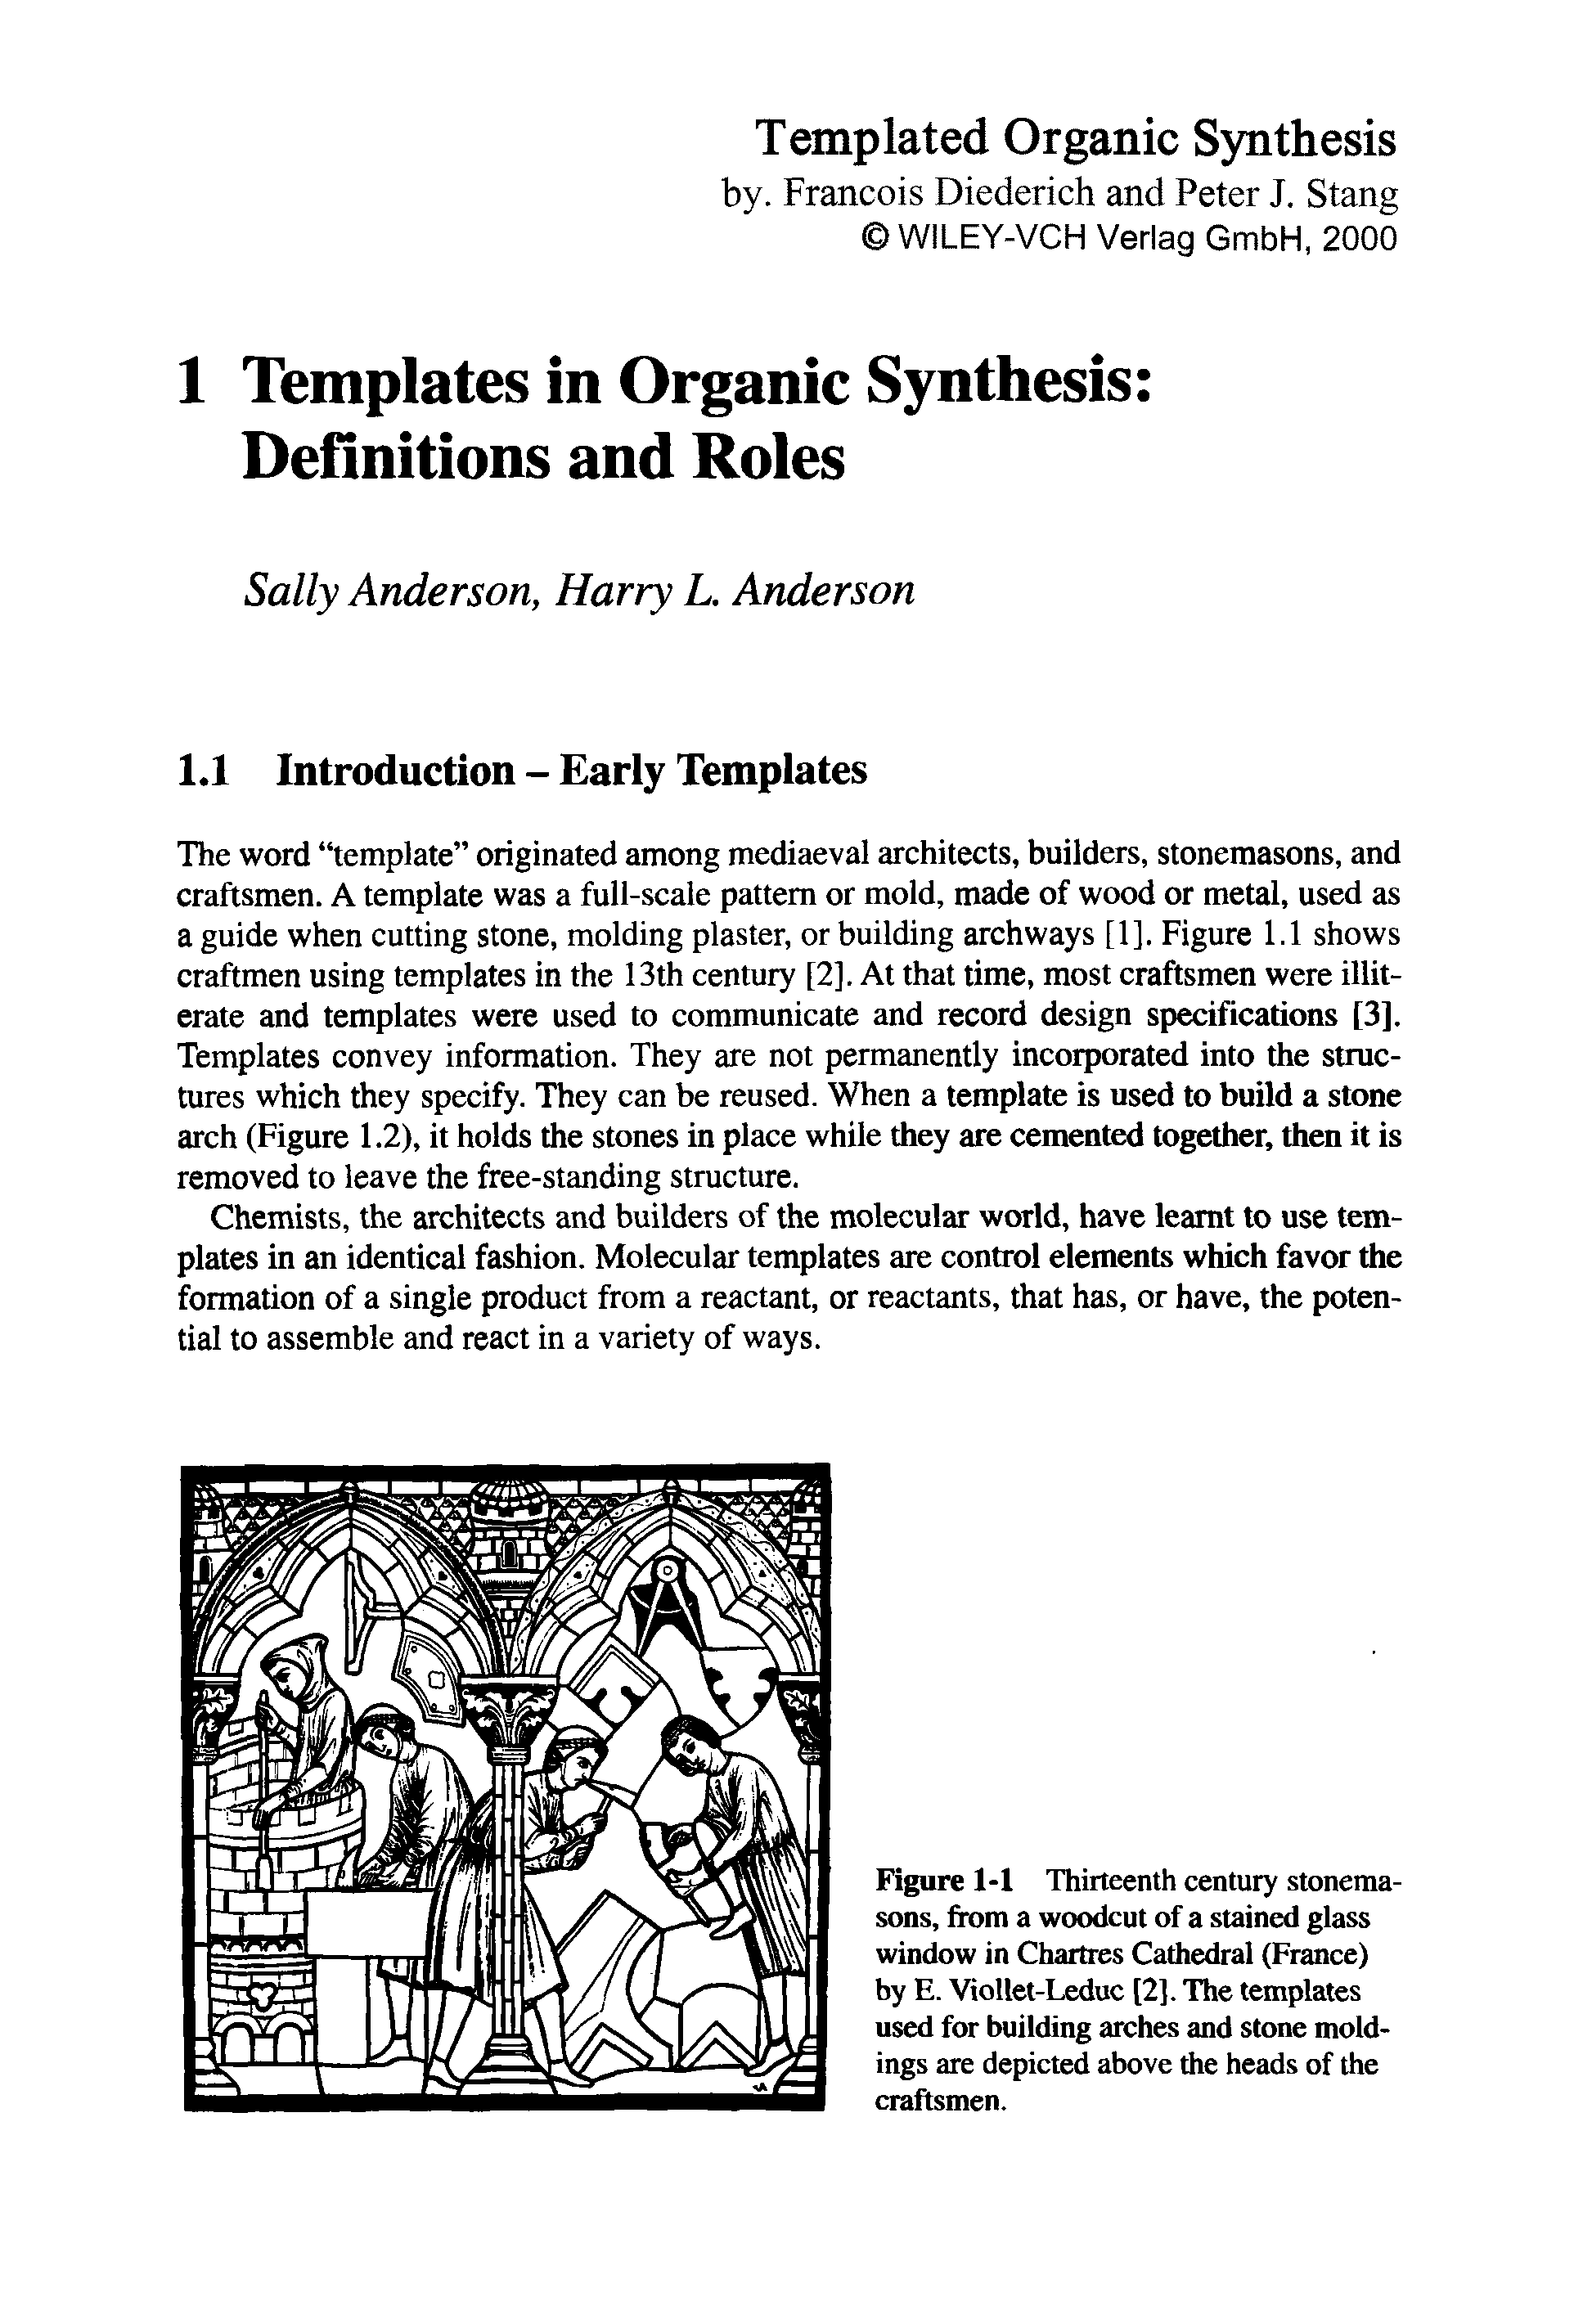 Figure 1-1 Thirteenth century stonemasons, from a woodcut of a stained glass window in Chartres Cathedral (France) by E. Viollet-Leduc [2]. The templates used for building arches and stone moldings are depicted above the heads of the craftsmen.